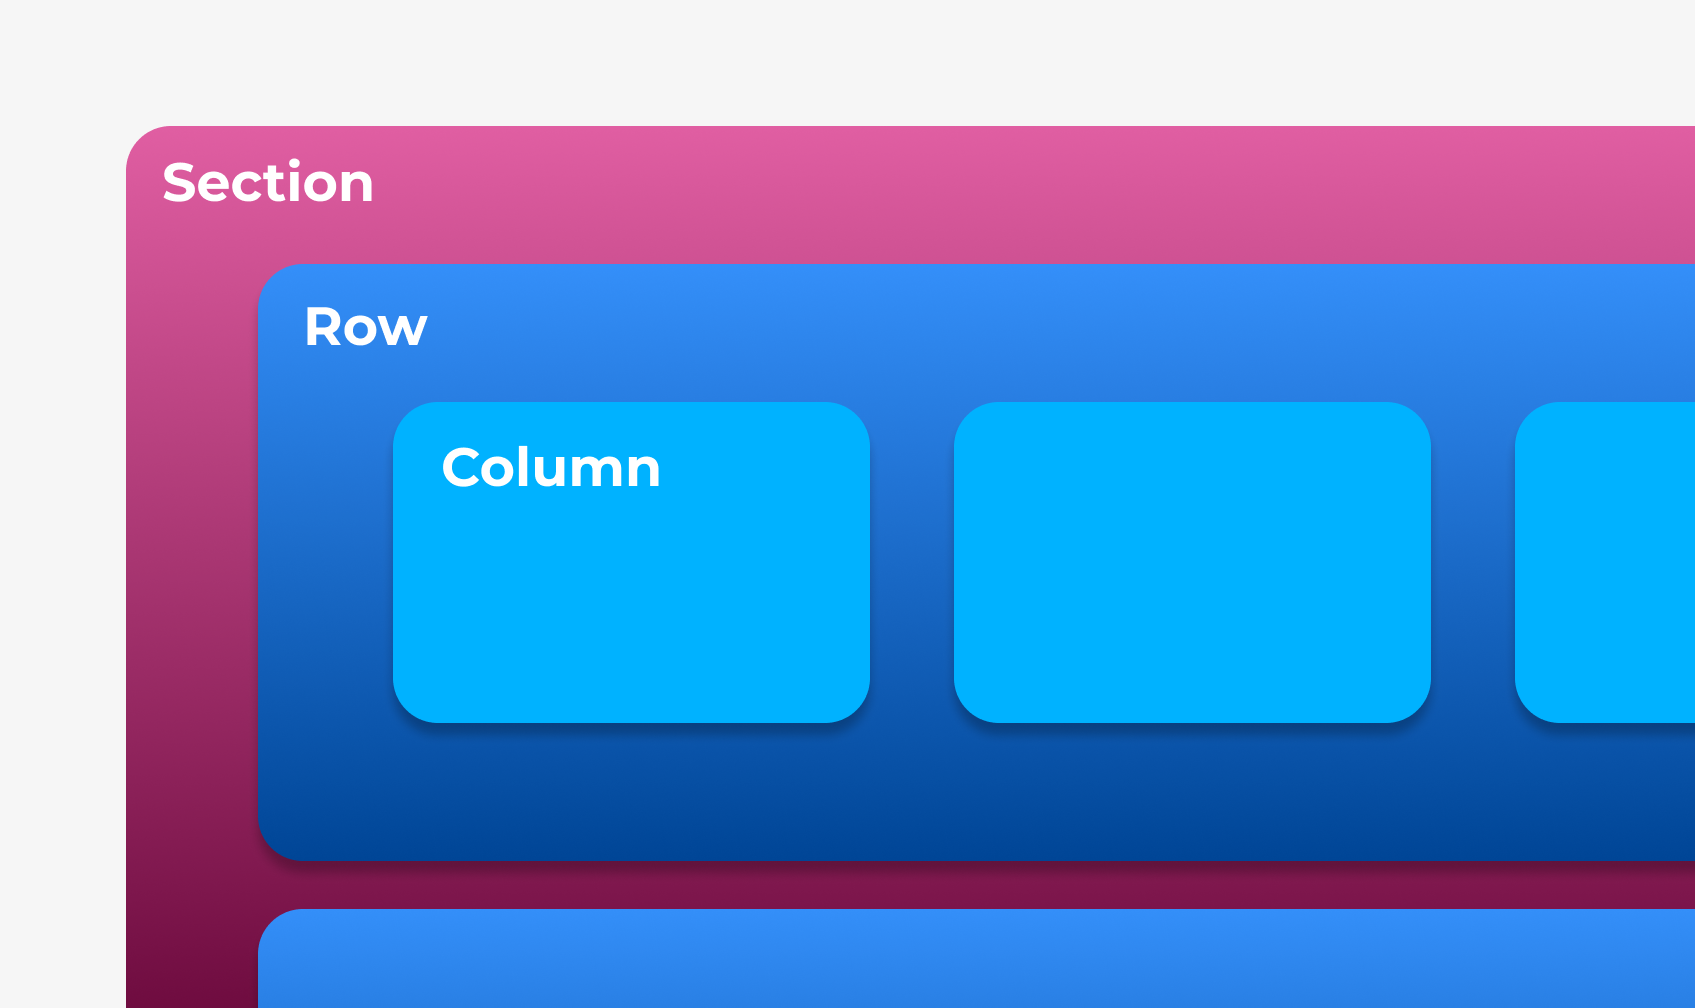 Build Beautiful Confluence Pages With Just a Few Clicks - basic structure of Karma canvas visualized: Section - Row - Column